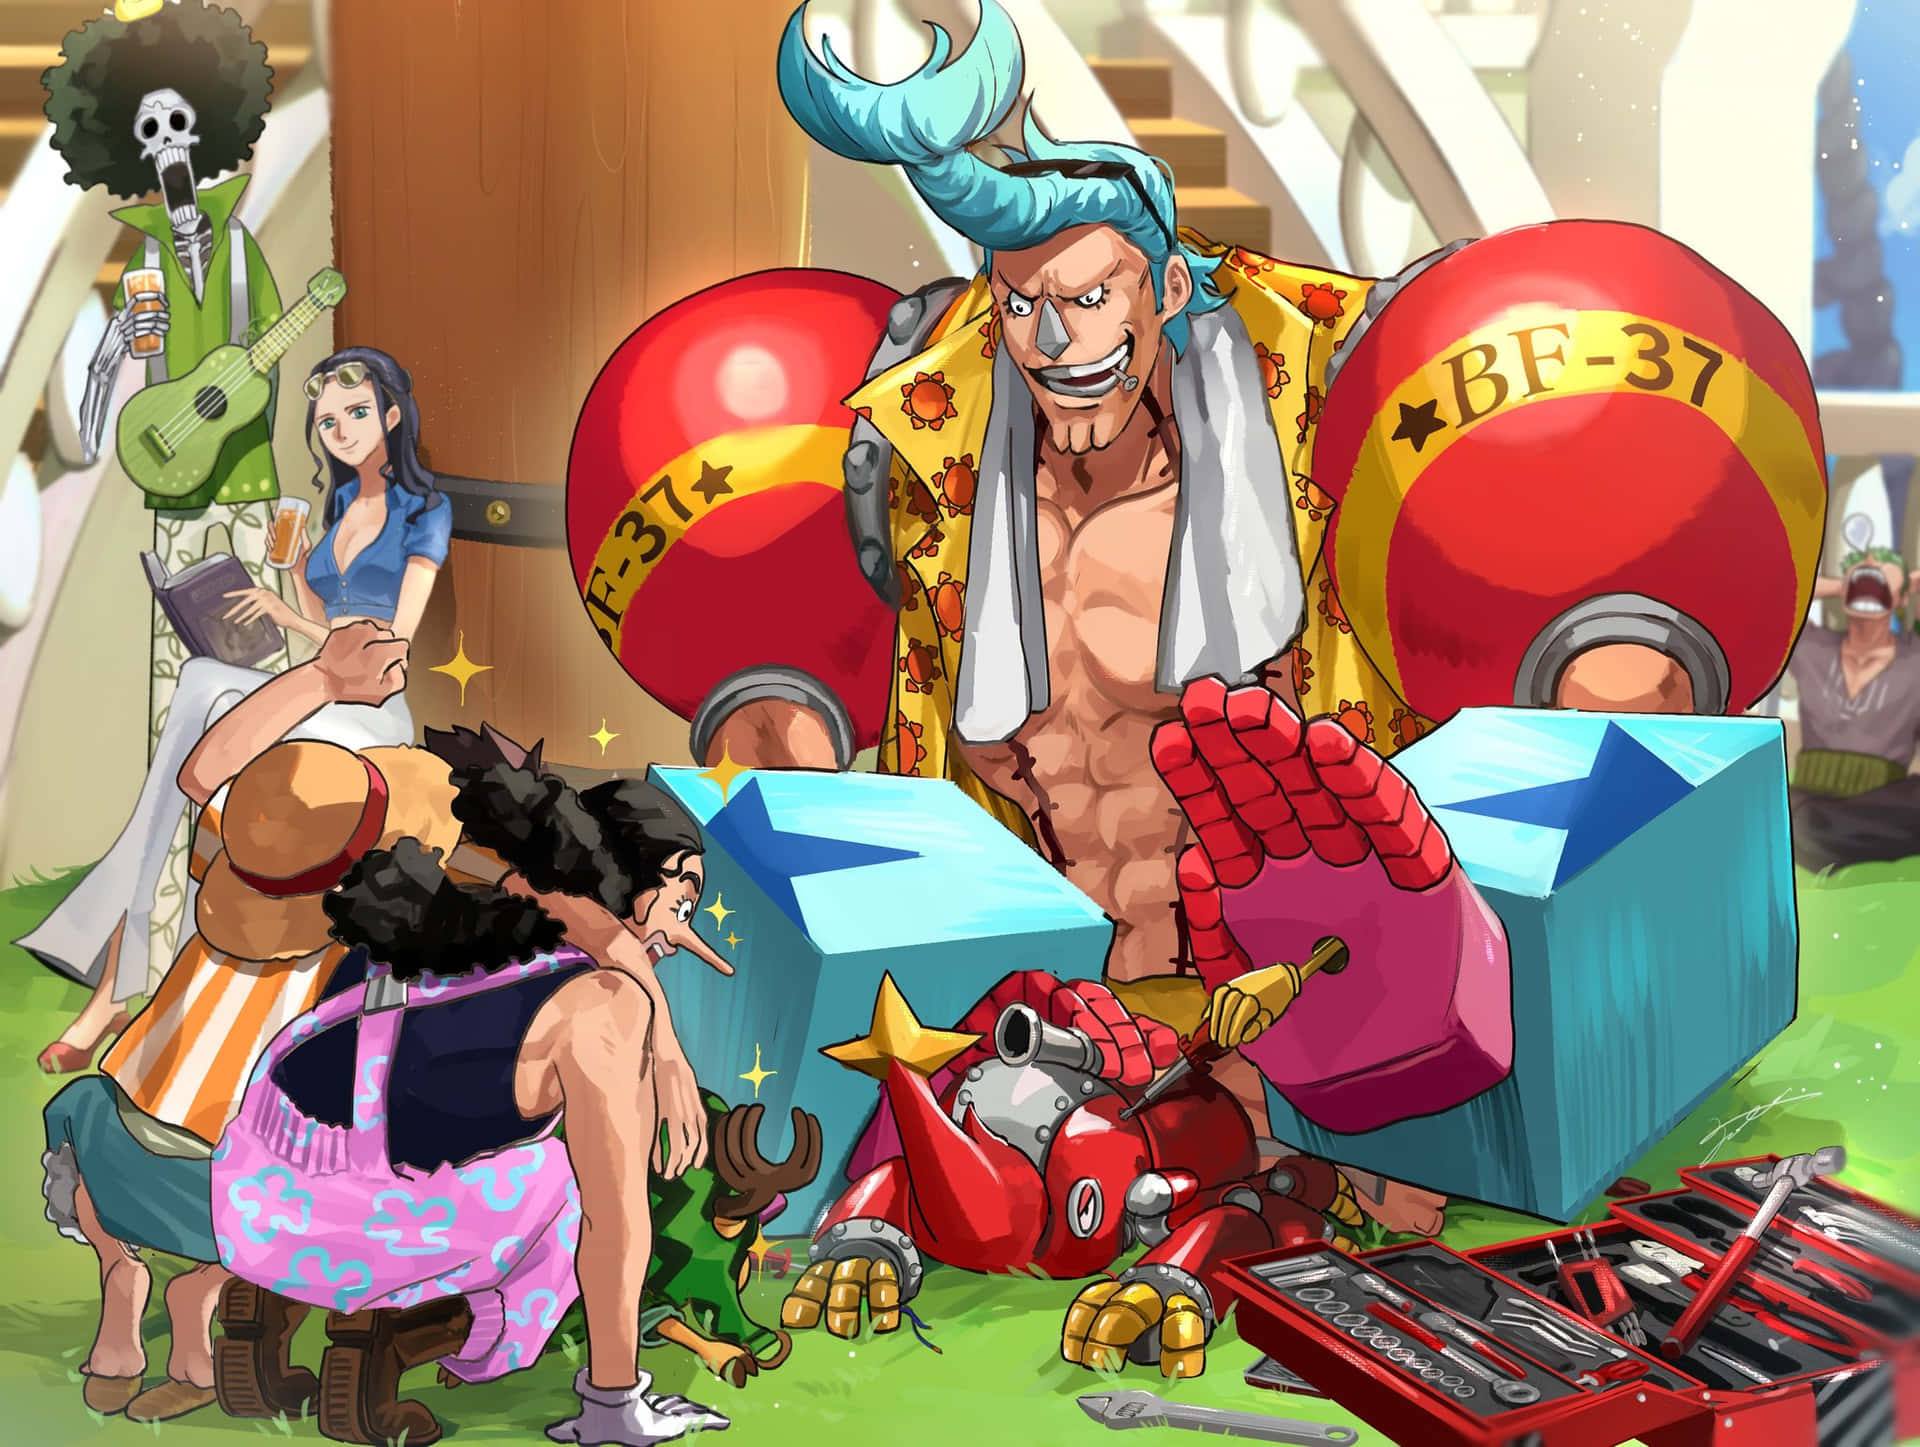 The refreshing, epic adventure of Franky Wallpaper